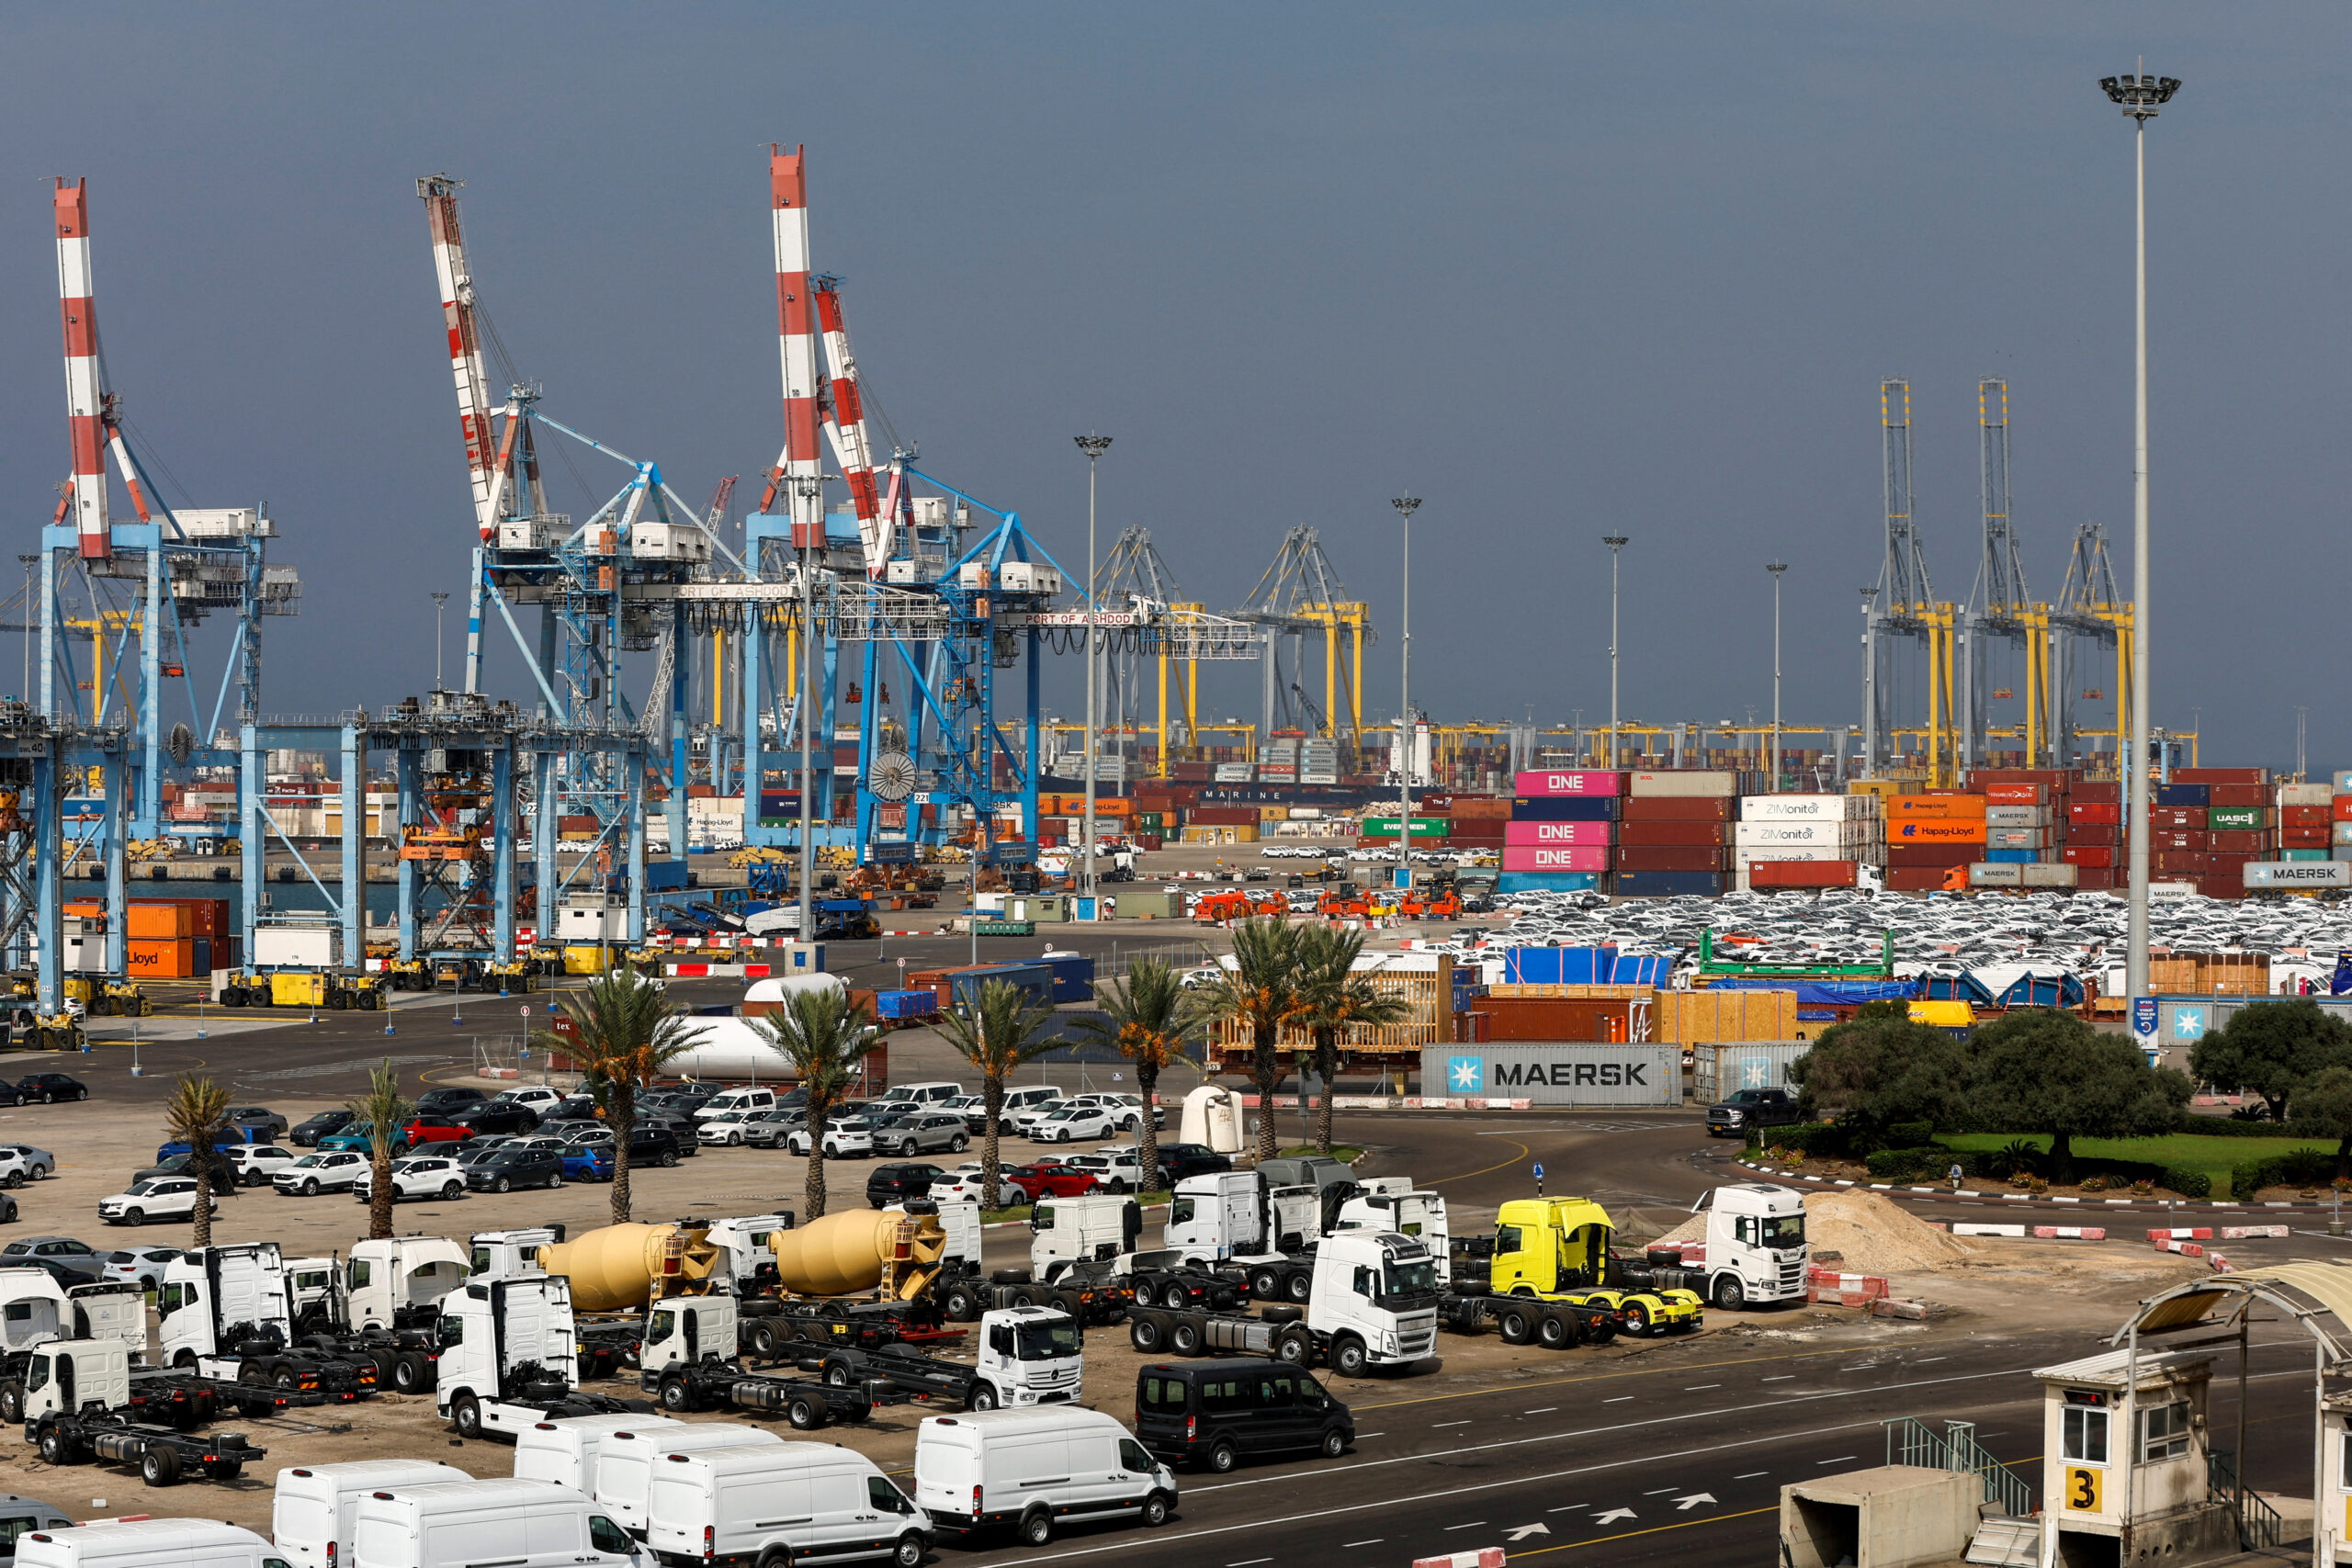 Ashdod port continues to operate under threat of rocket attacks. REUTERS/Ammar Awad